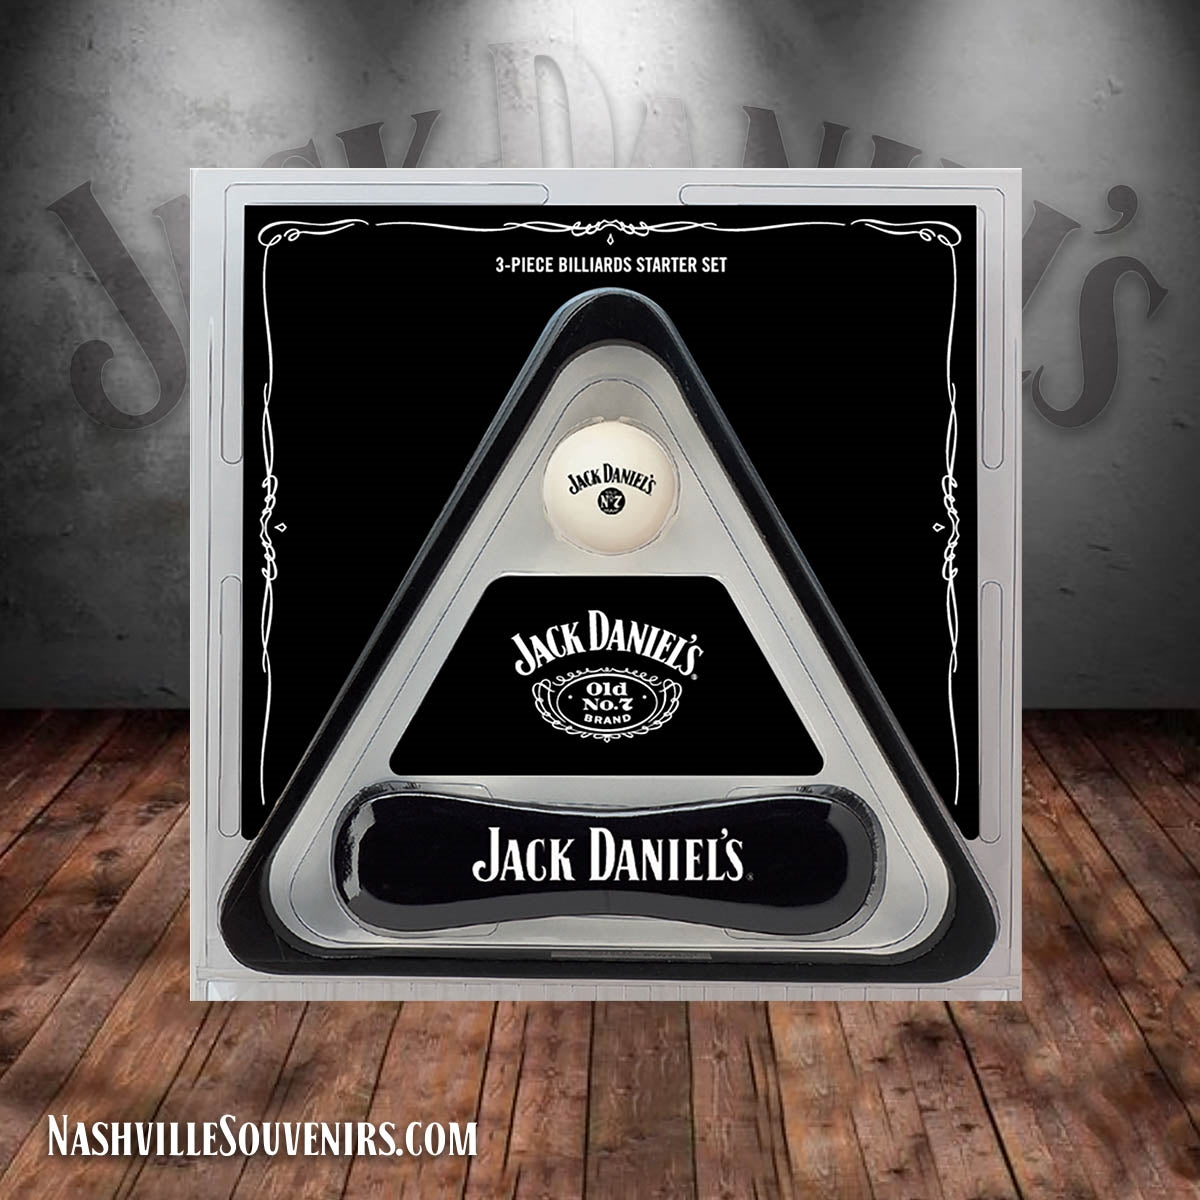 Clean up between games with this great Jack Daniels Billiard Set. Get yours today with FREE SHIPPING in the continental United States.